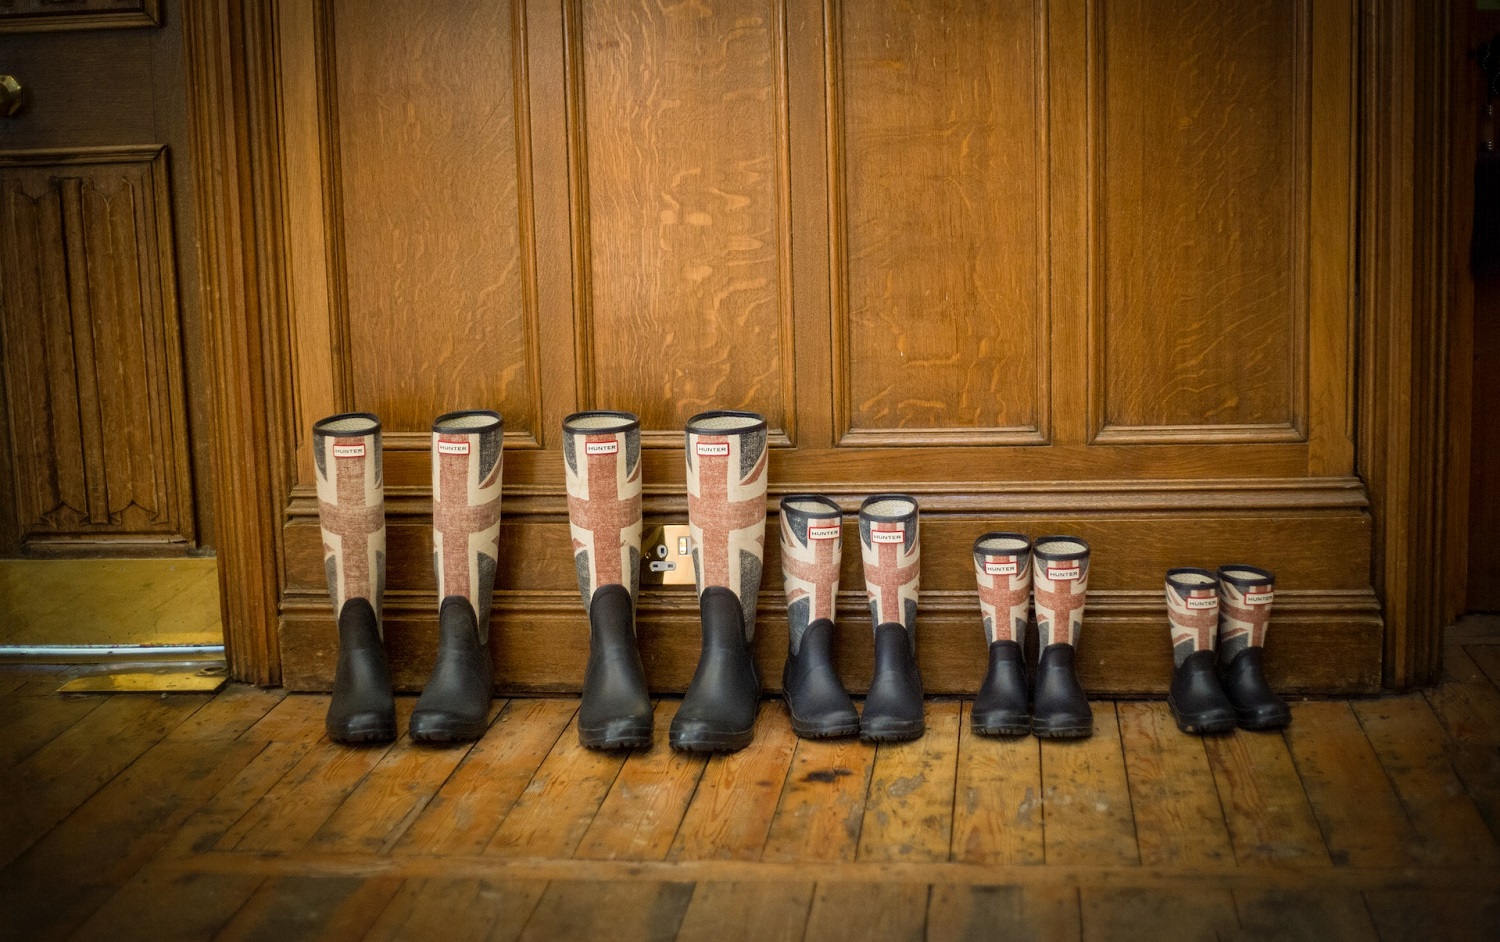 British flags on boots